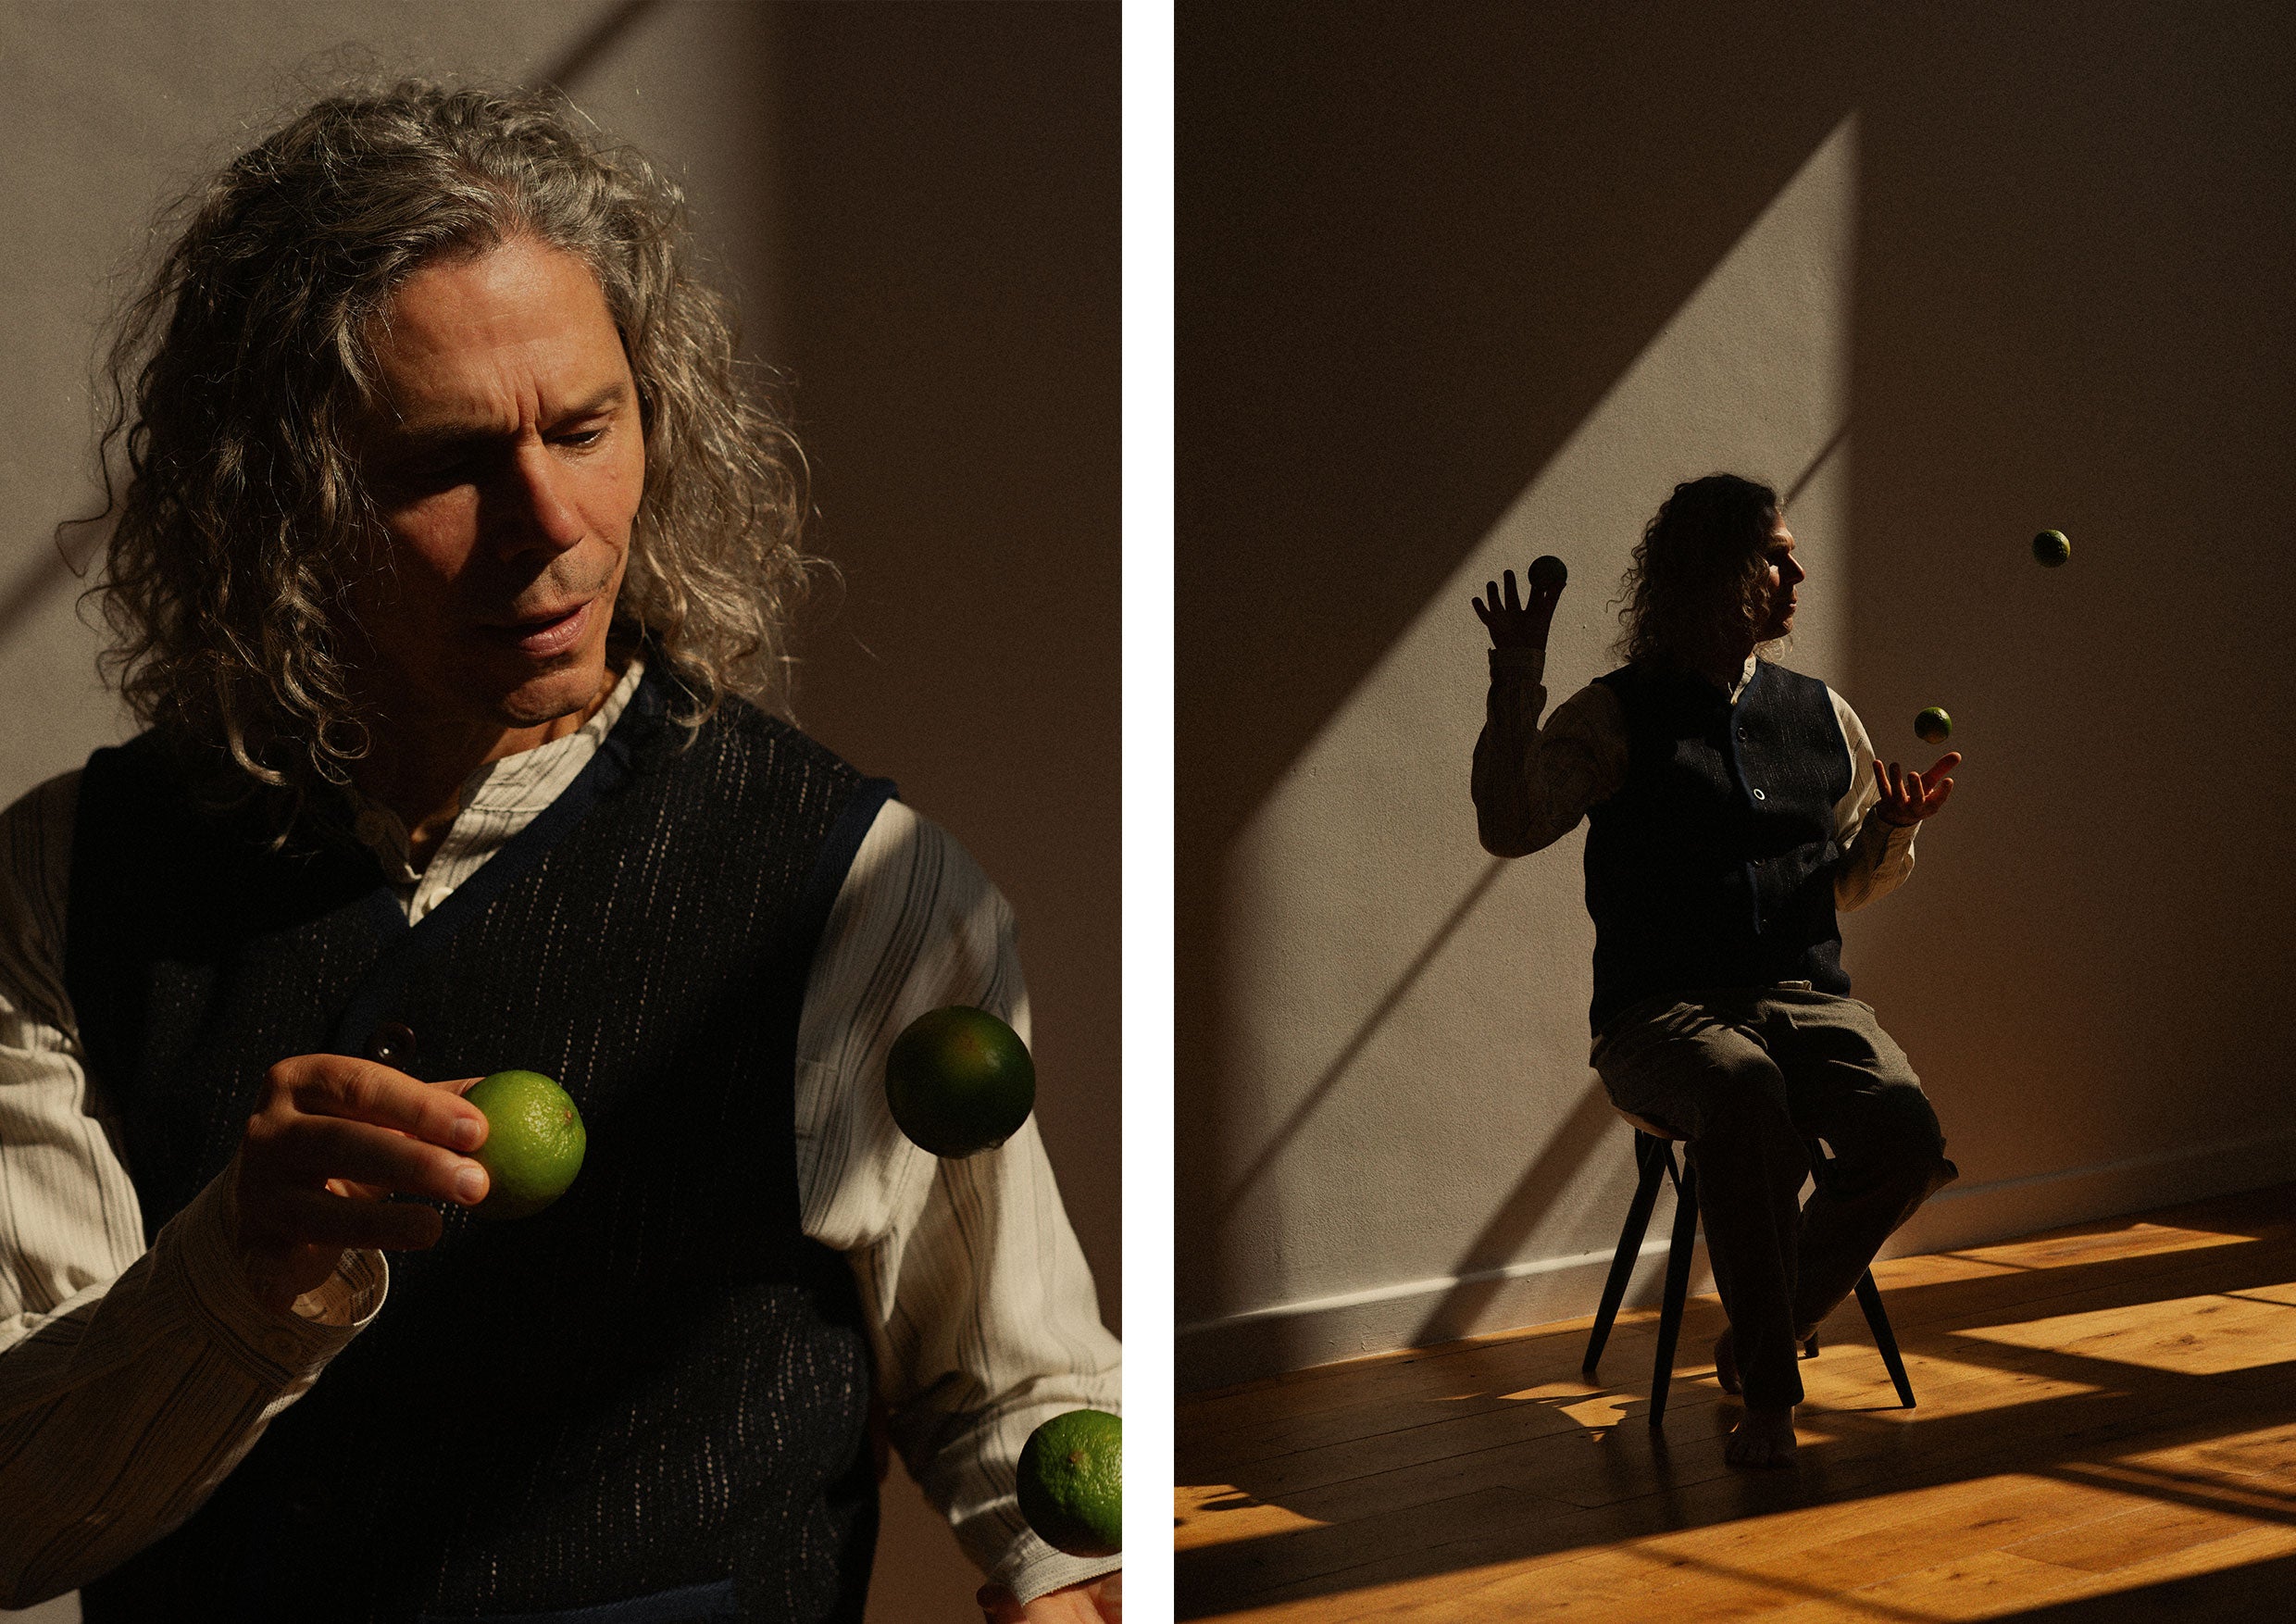 Man juggling with limes